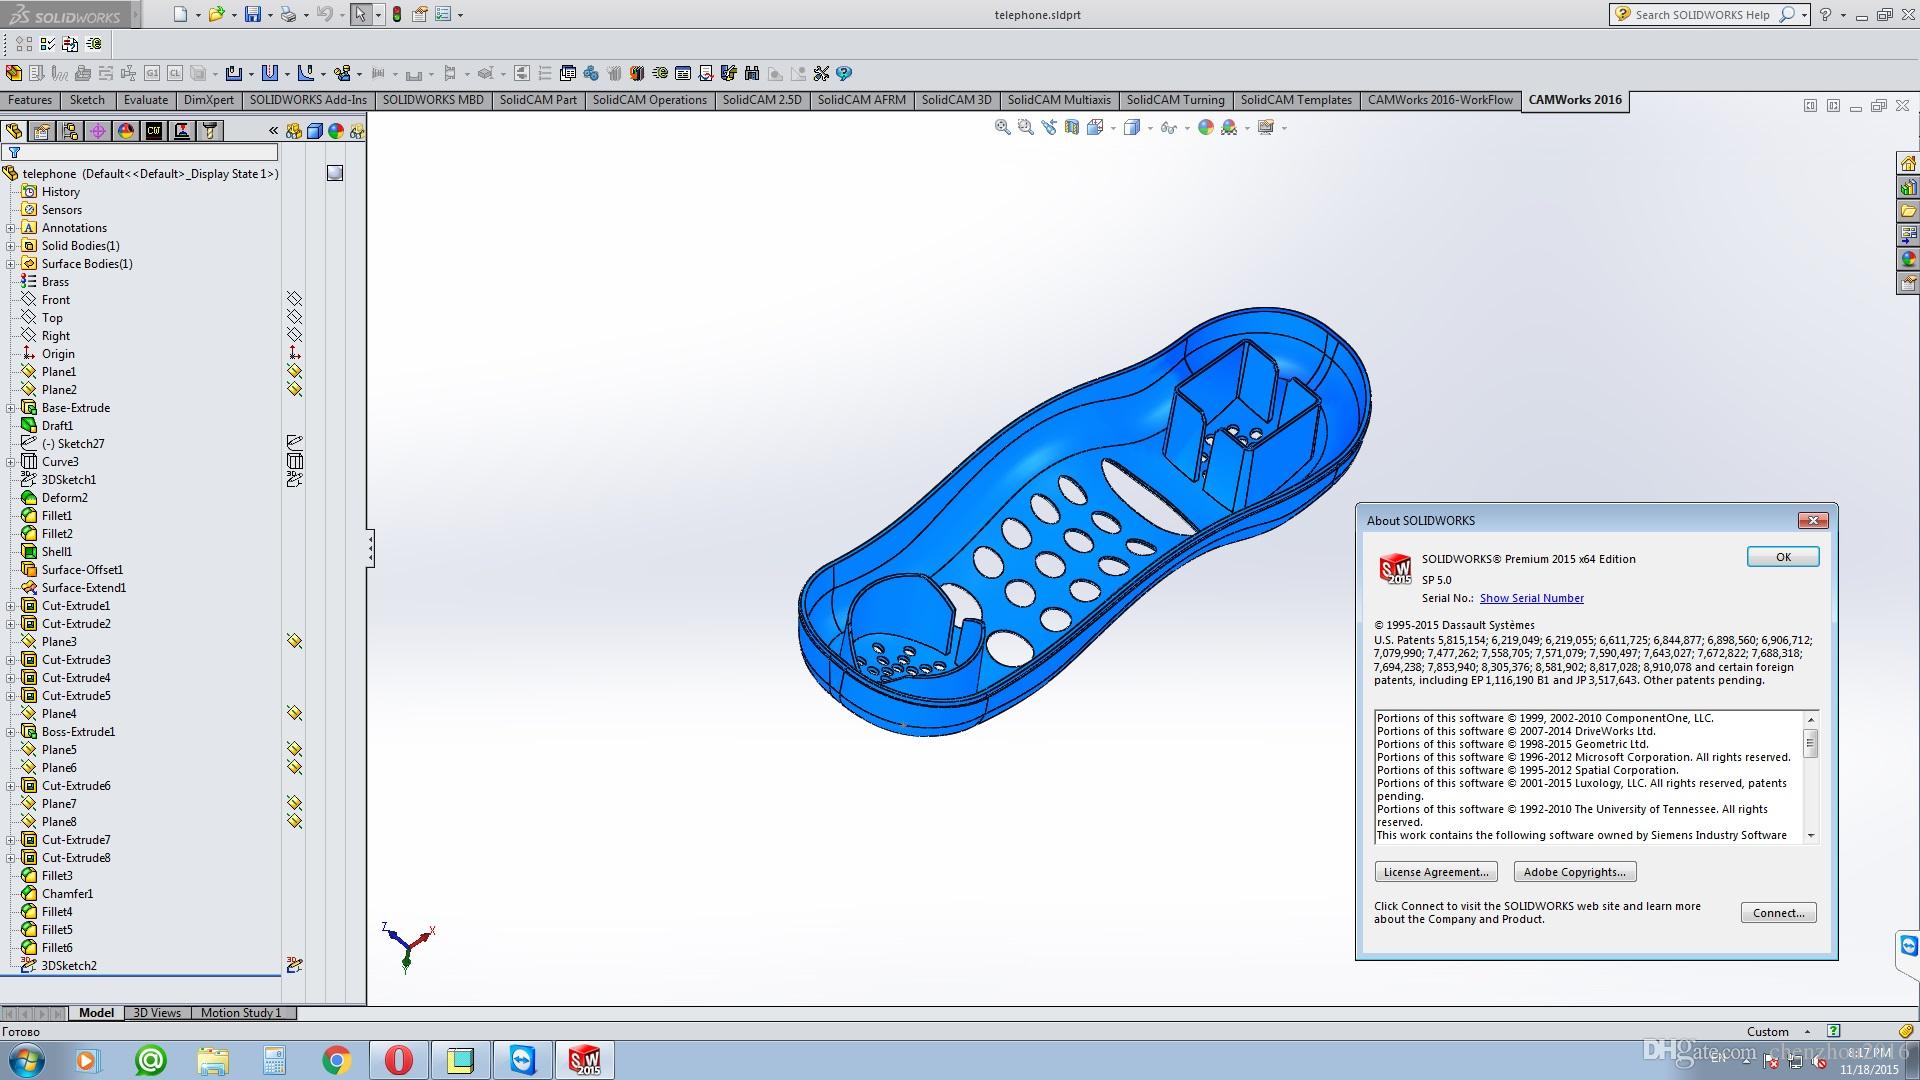 solidworks 2014 free download with crack 64 bit